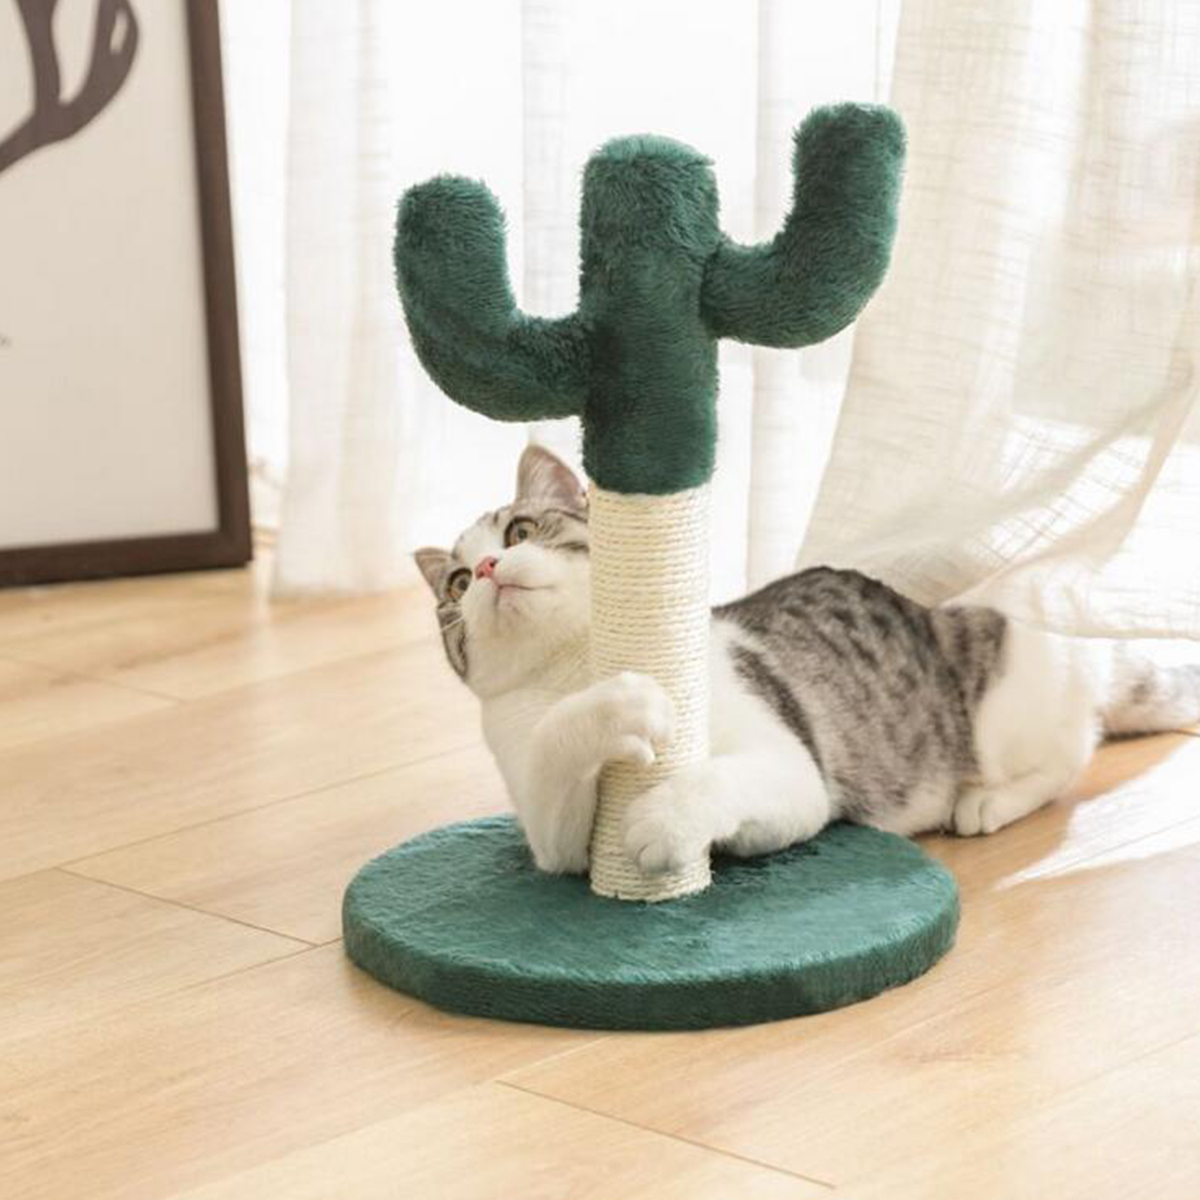 Cute-Cactus-Pet-Cat-Tree-Toys-with-Ball-Scratcher-Posts-for-Cats-Kitten-Climbing-Tree-Cat-Toy-Protec-1914852-7